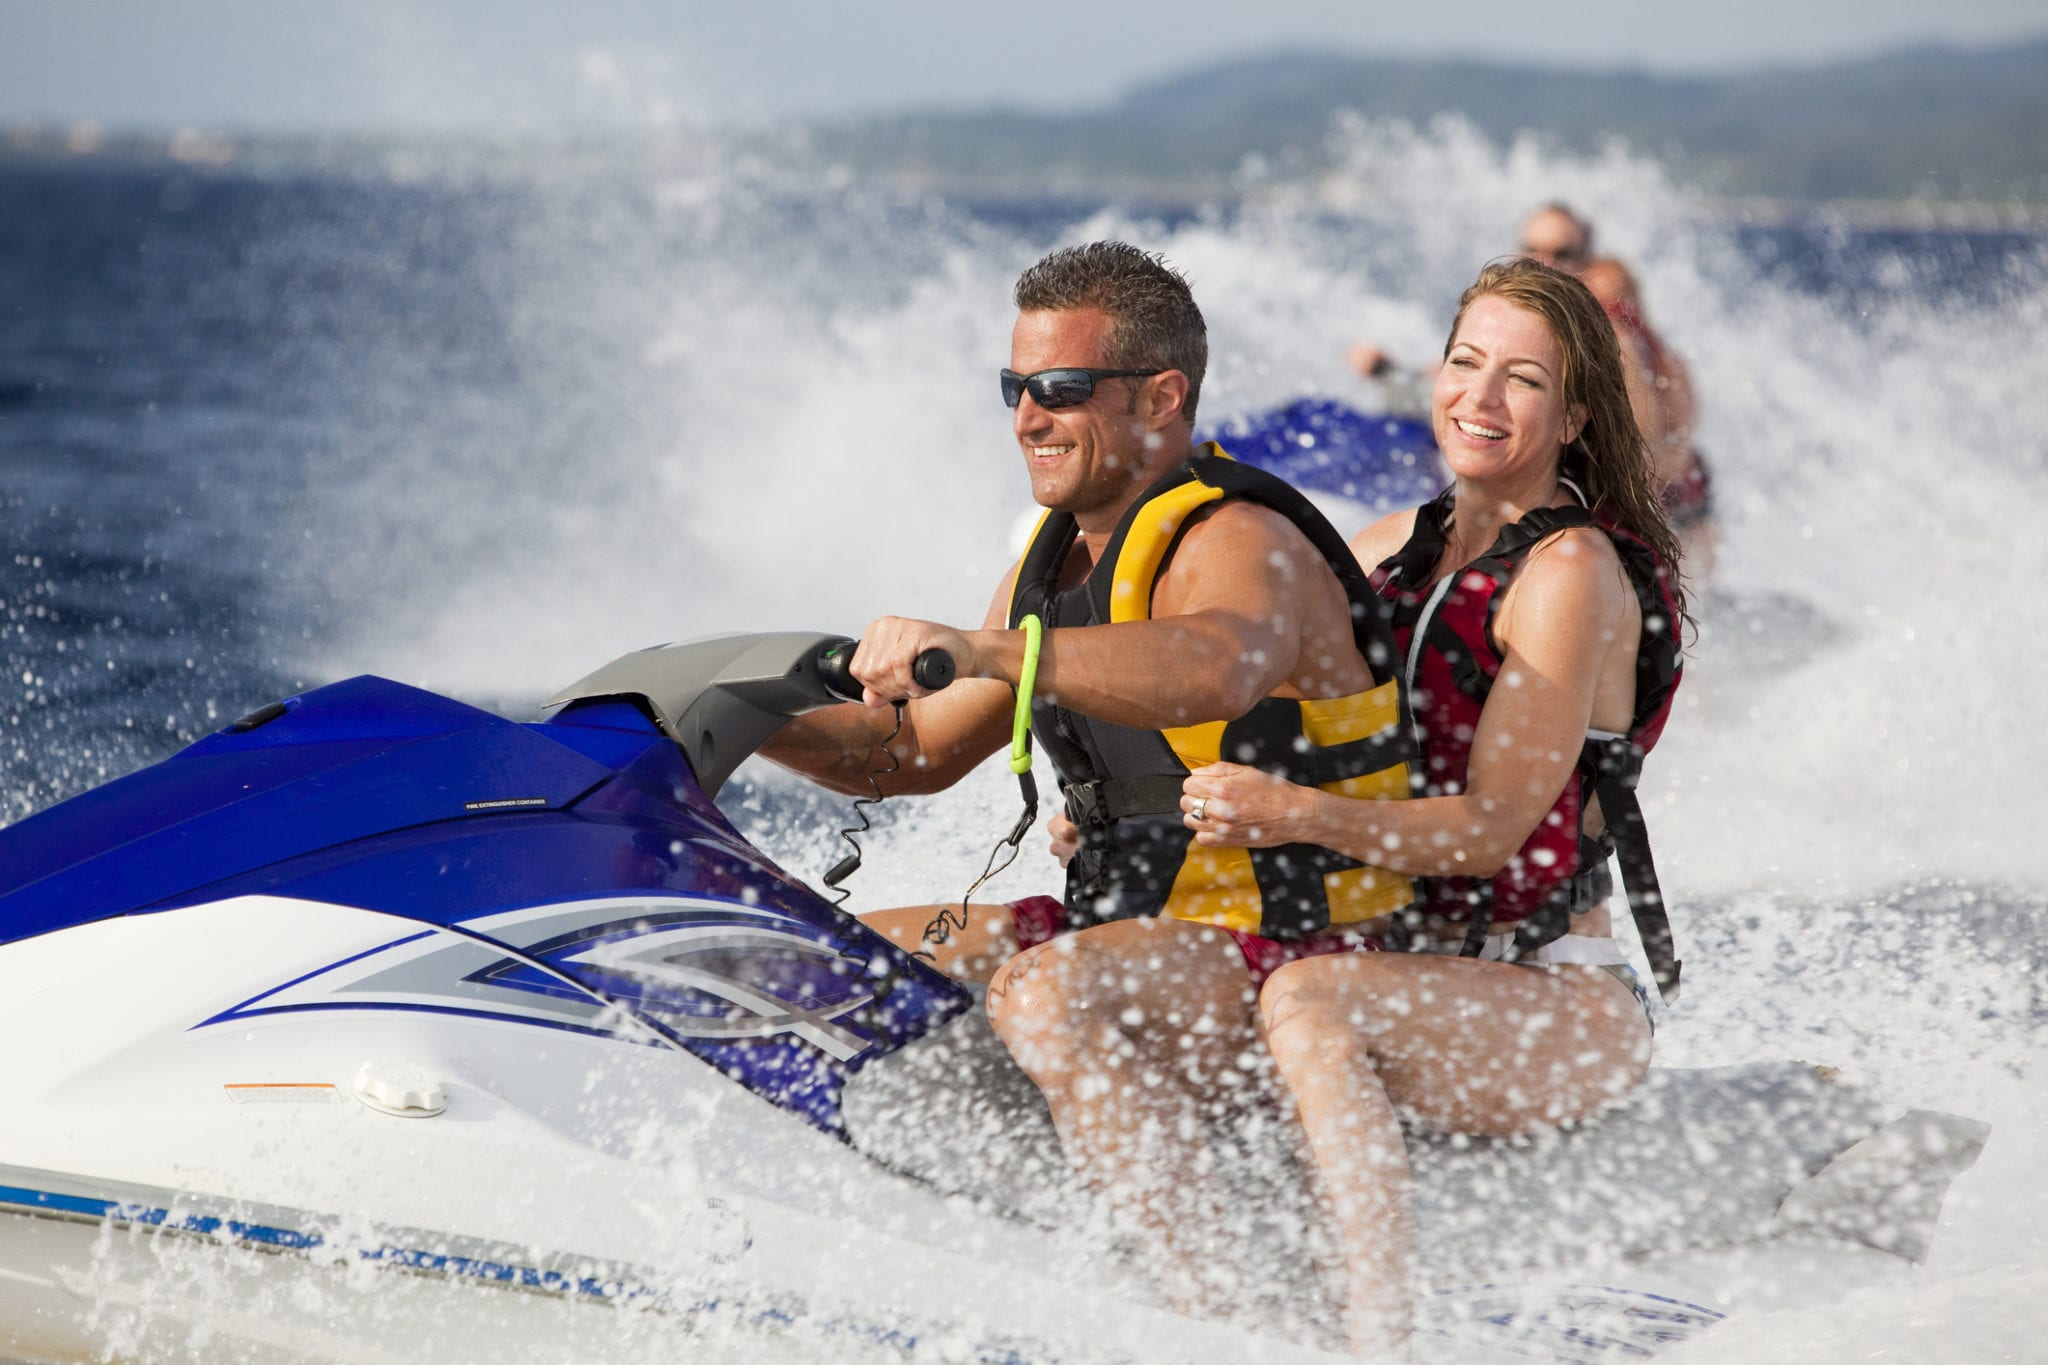 myrtle beach watersports - couple jet skiing